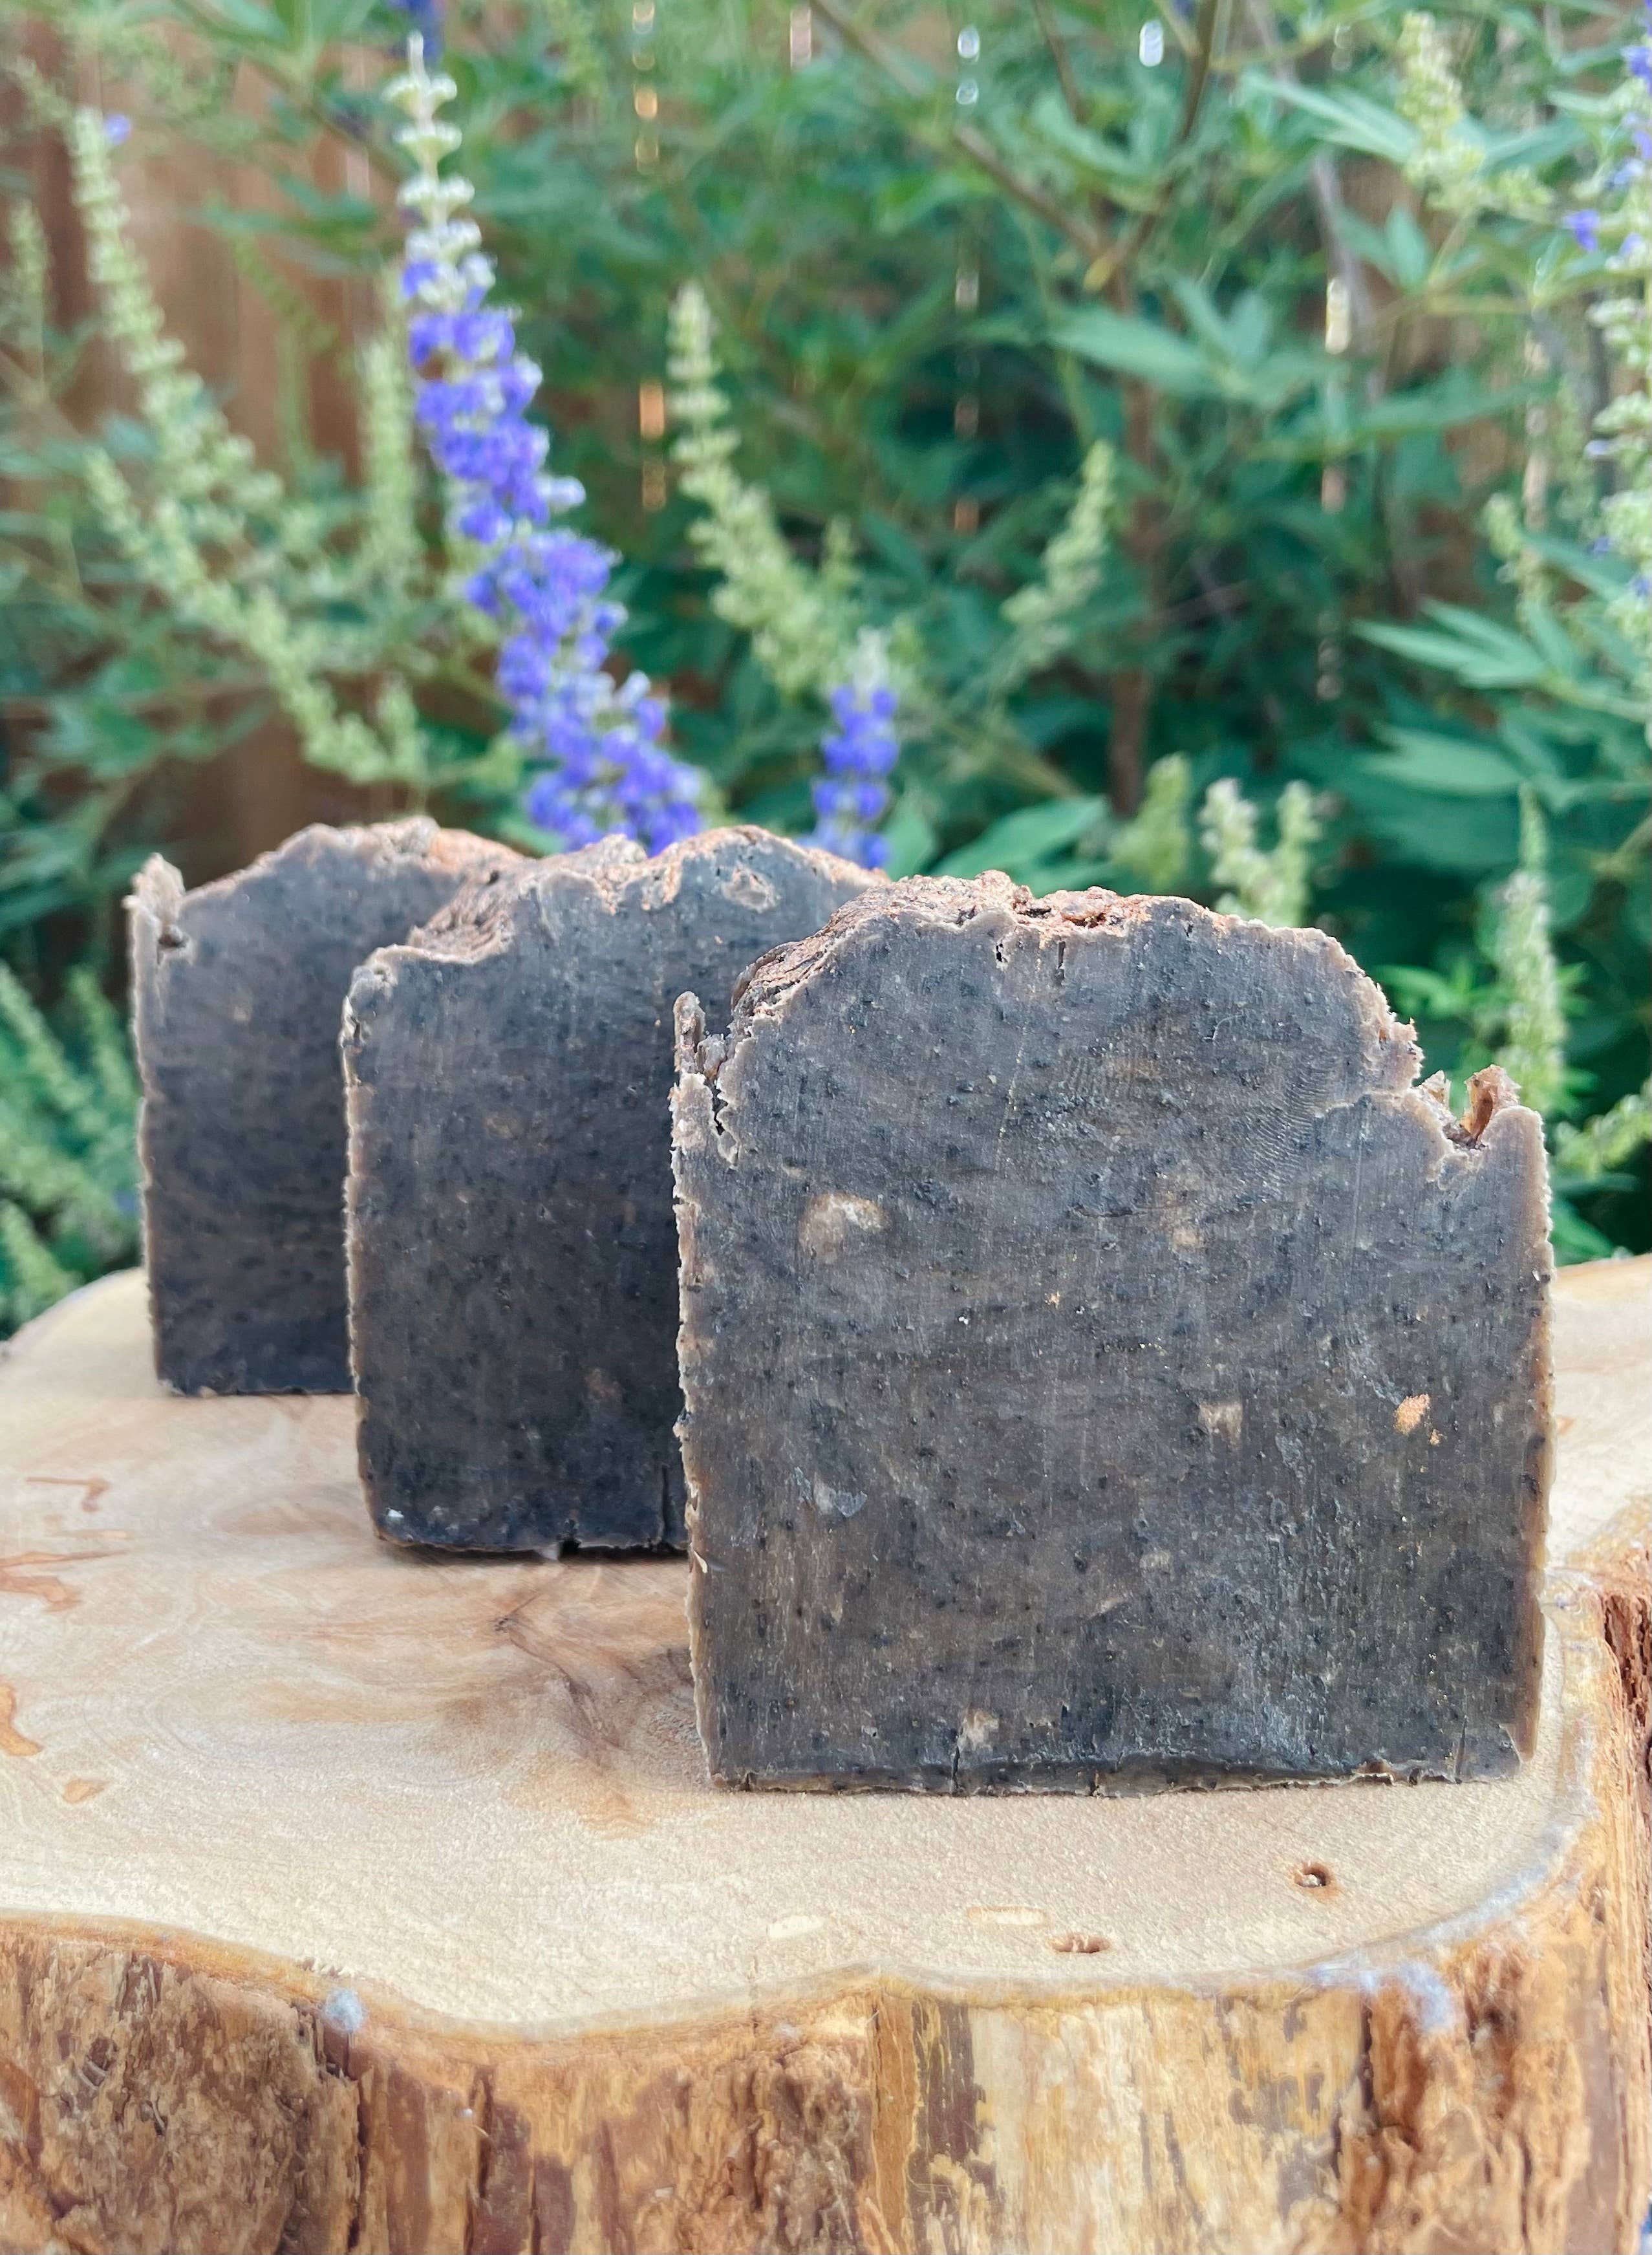 West Texas Soap Co. - Exfoliating Coffee Soap